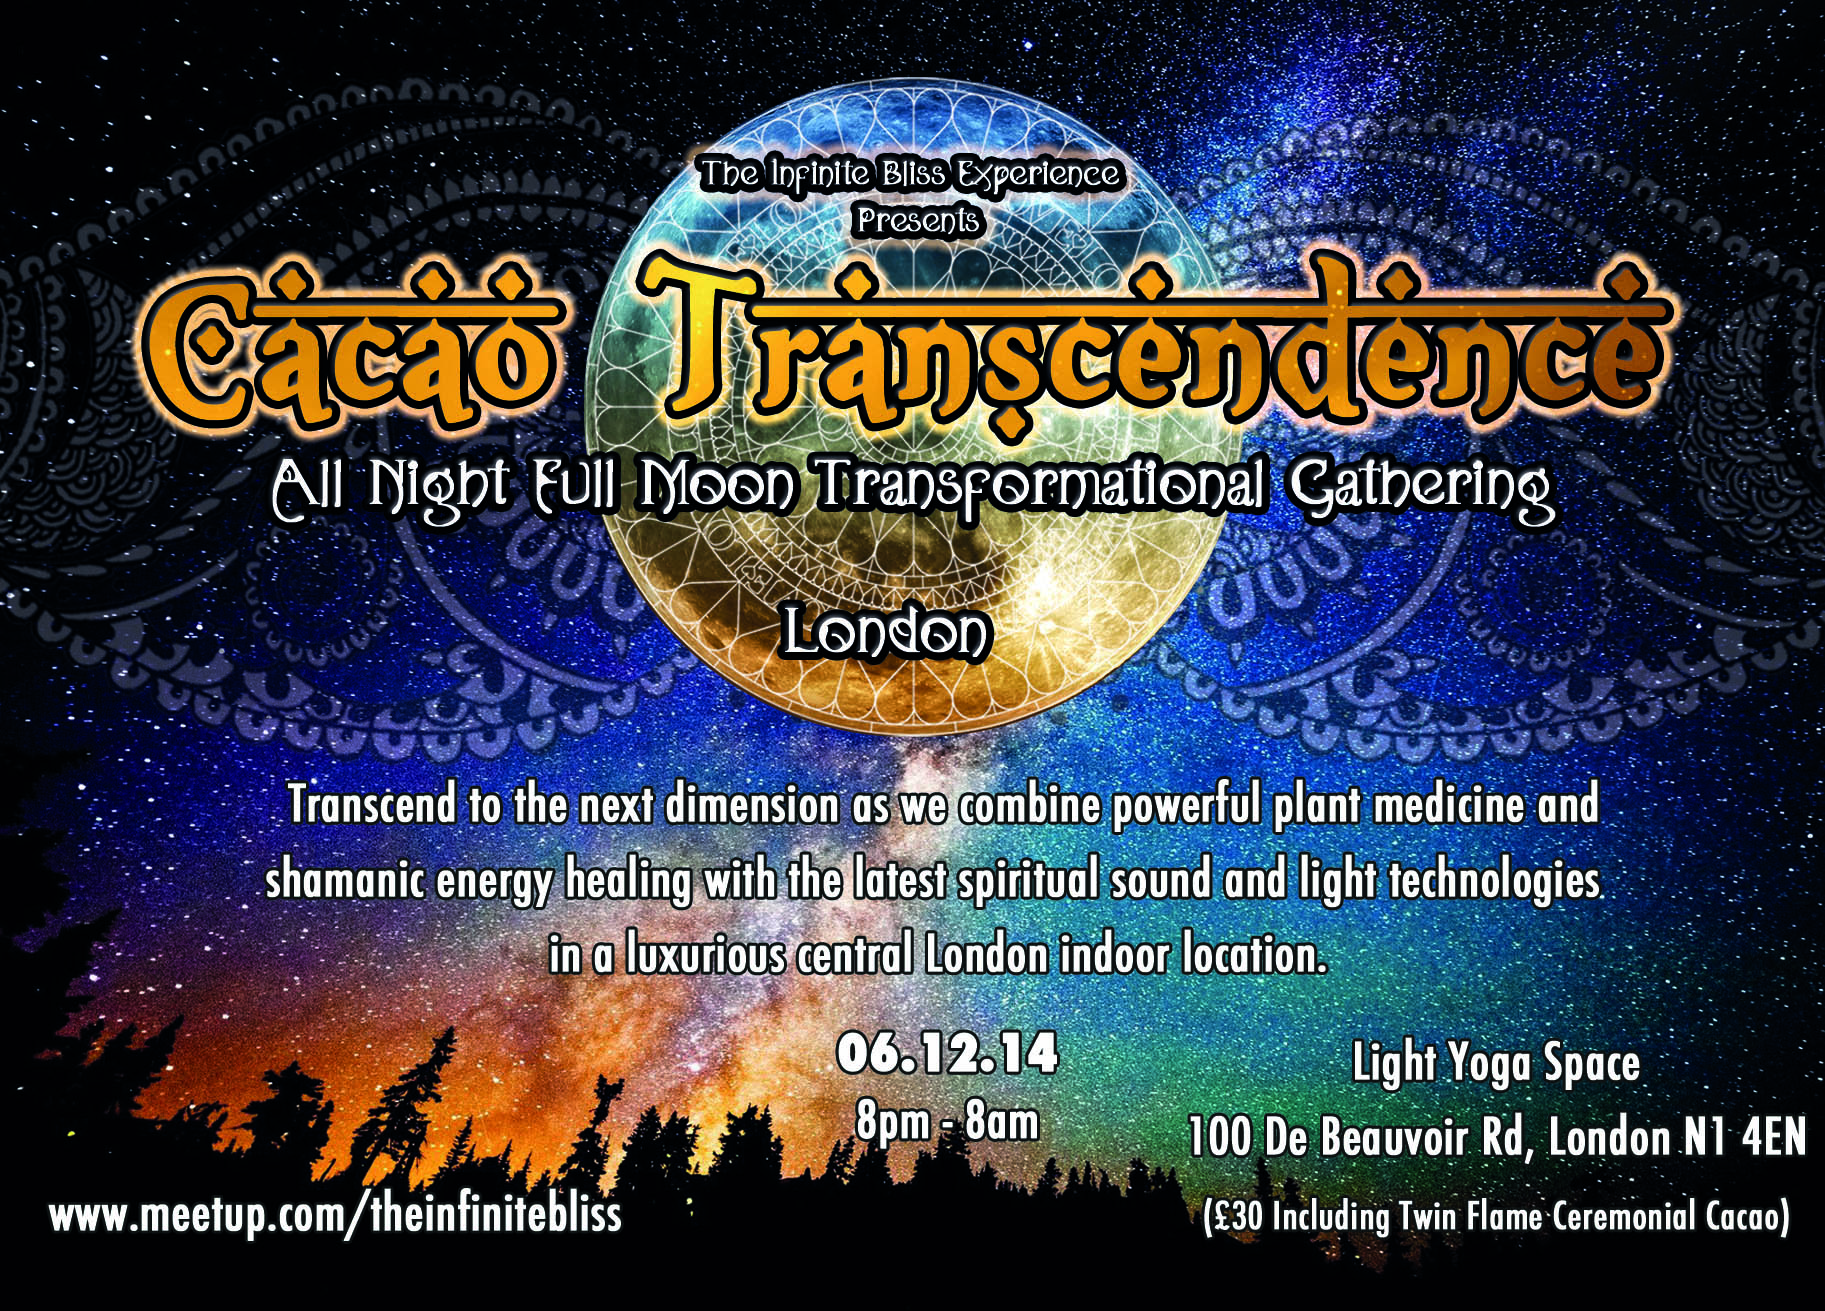 LONDON - Cacao Transcendence (All Night Full Moon Transformational Gathering)